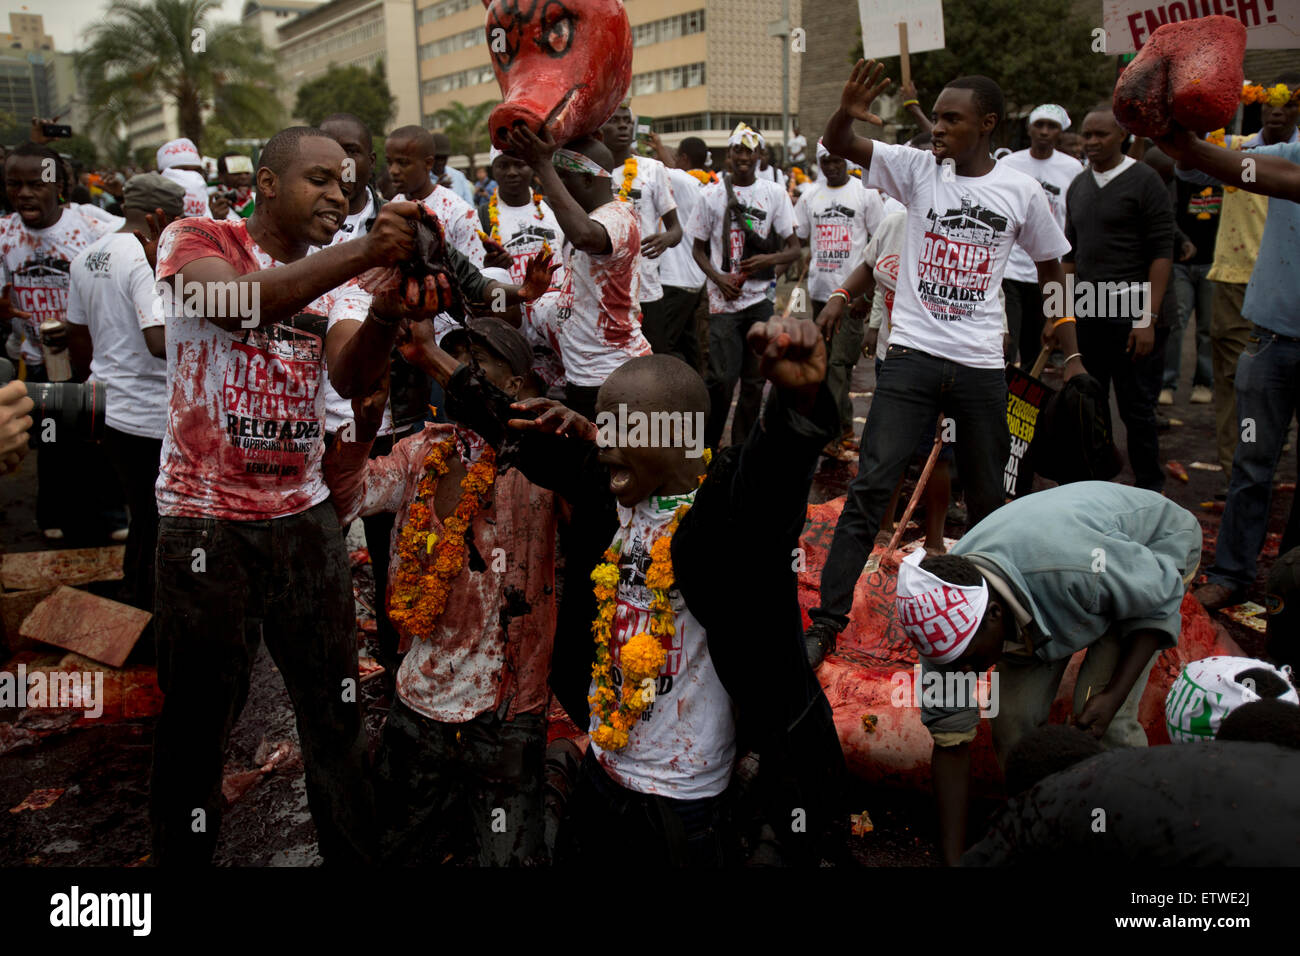 Kenyan protestors cover themselves with animal blood symbolising greed during a protest over Members of Parliaments salaries, 11 June 2013 Kenyan MP's have voted to allow them a pay increase in defiance of proposals to cut pay. Kenyan MP's are already one of the higest paid in the world.The MP's voted  for a monthly salary of about $10,000 (£6,540).KAREL PRINSLOO. Stock Photo